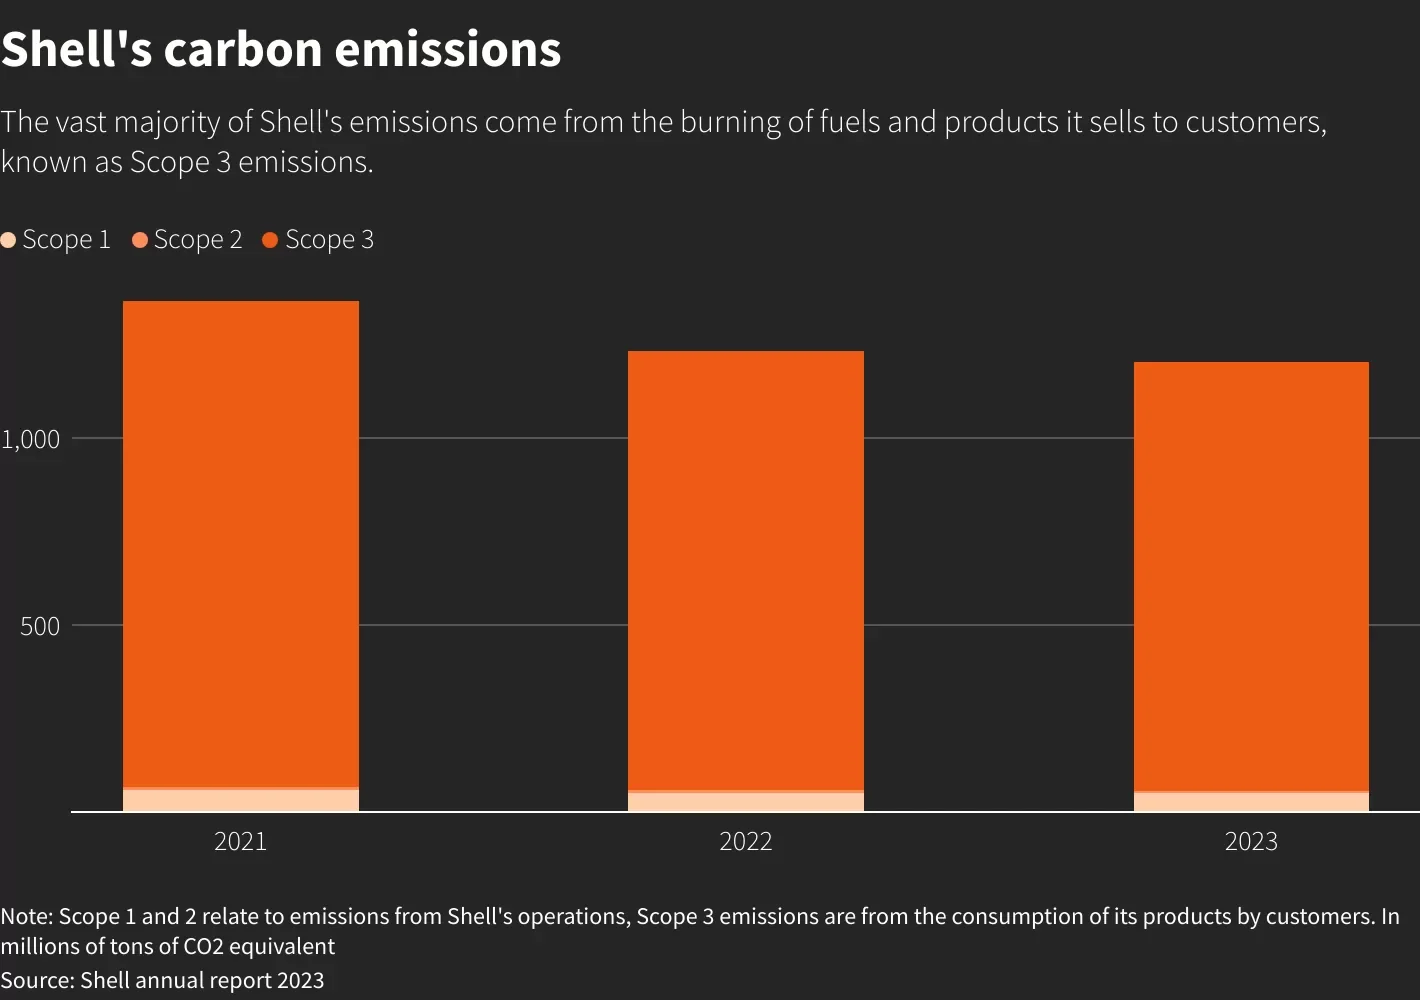 Shell's carbon emissions